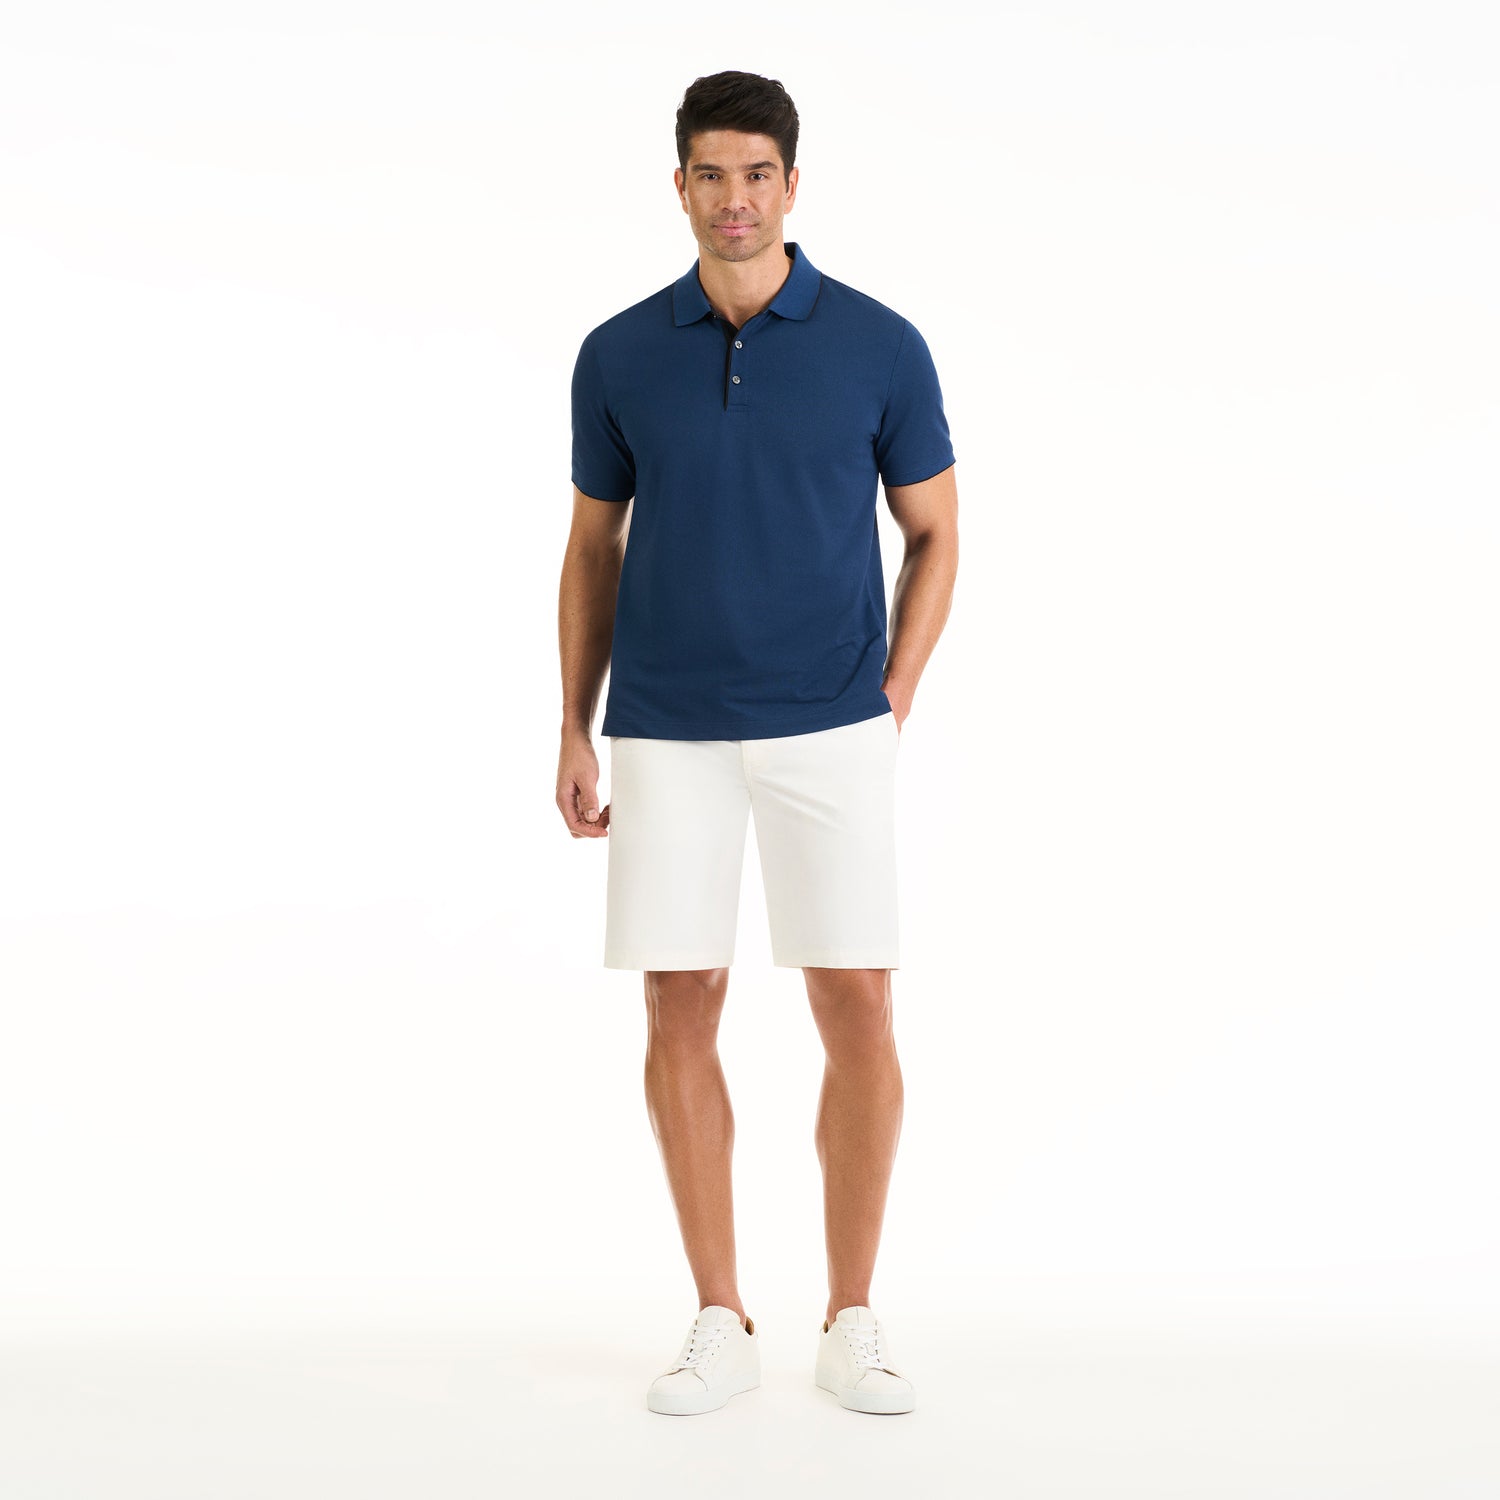 Essential Tailored Comfort Pique Stain Shield Polo